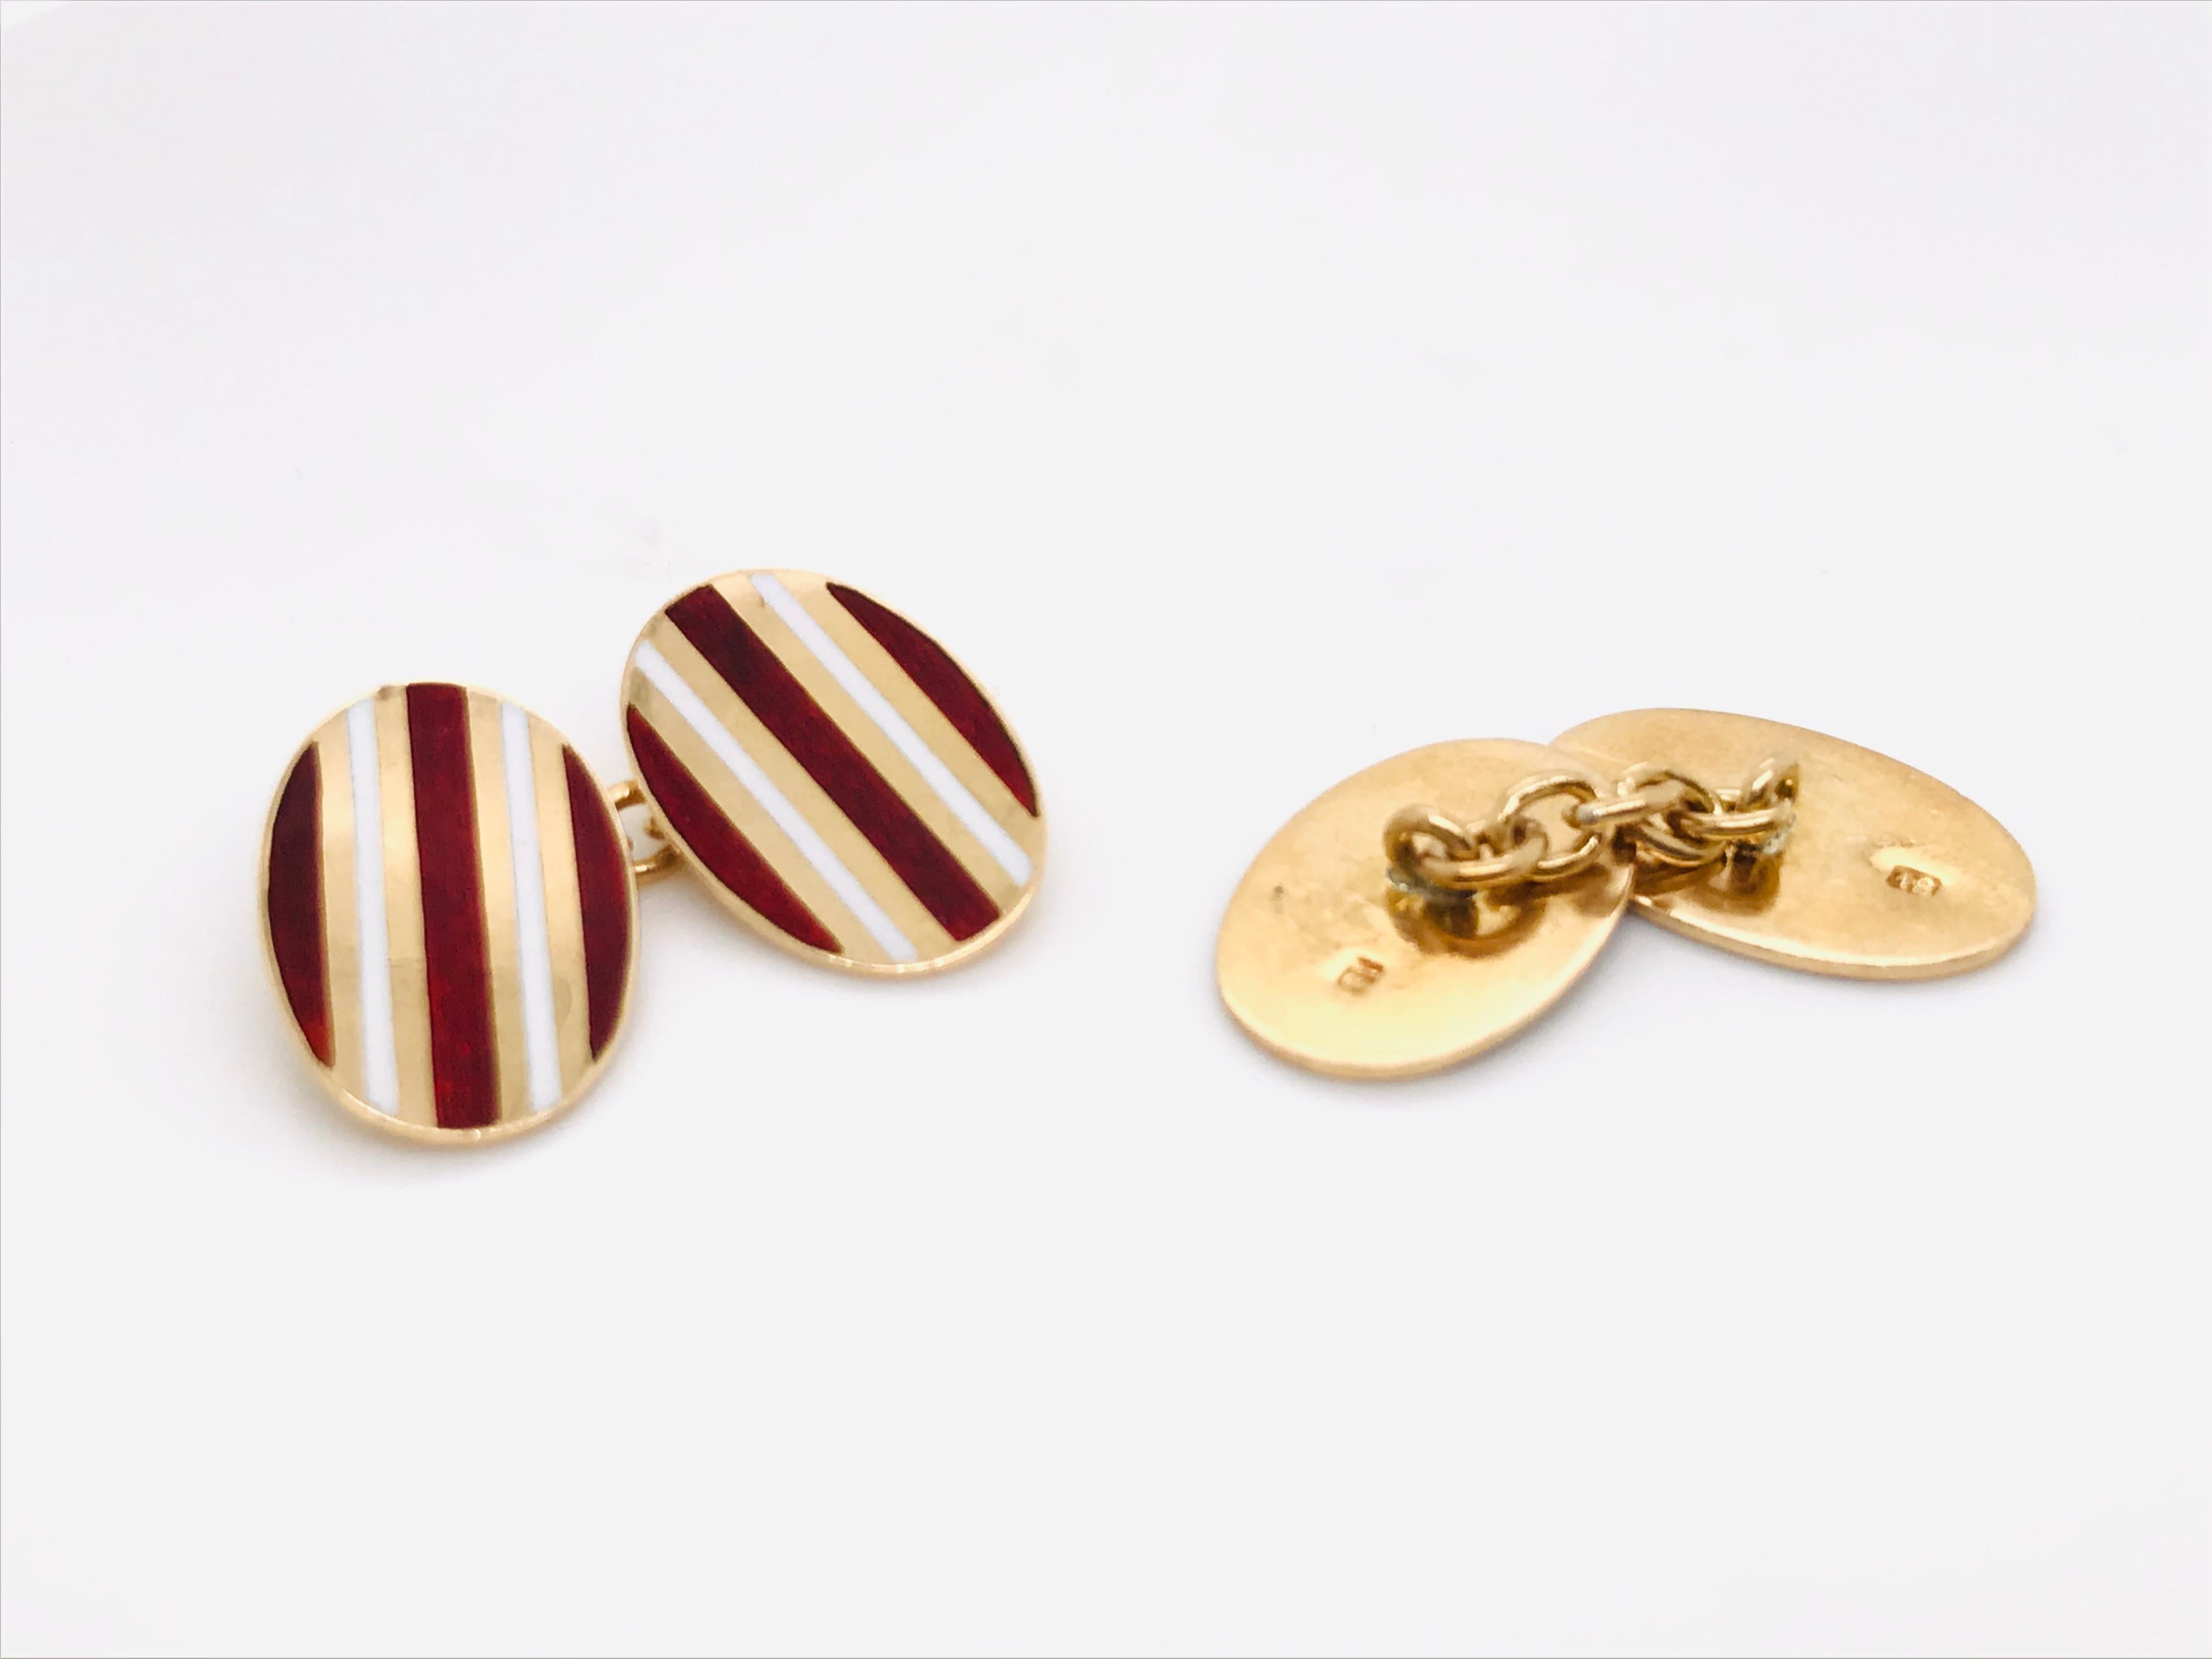 Red and Gold 18 k Cufflinks
Years 50 
Enamel red and White
Yellow Gold 18 k 